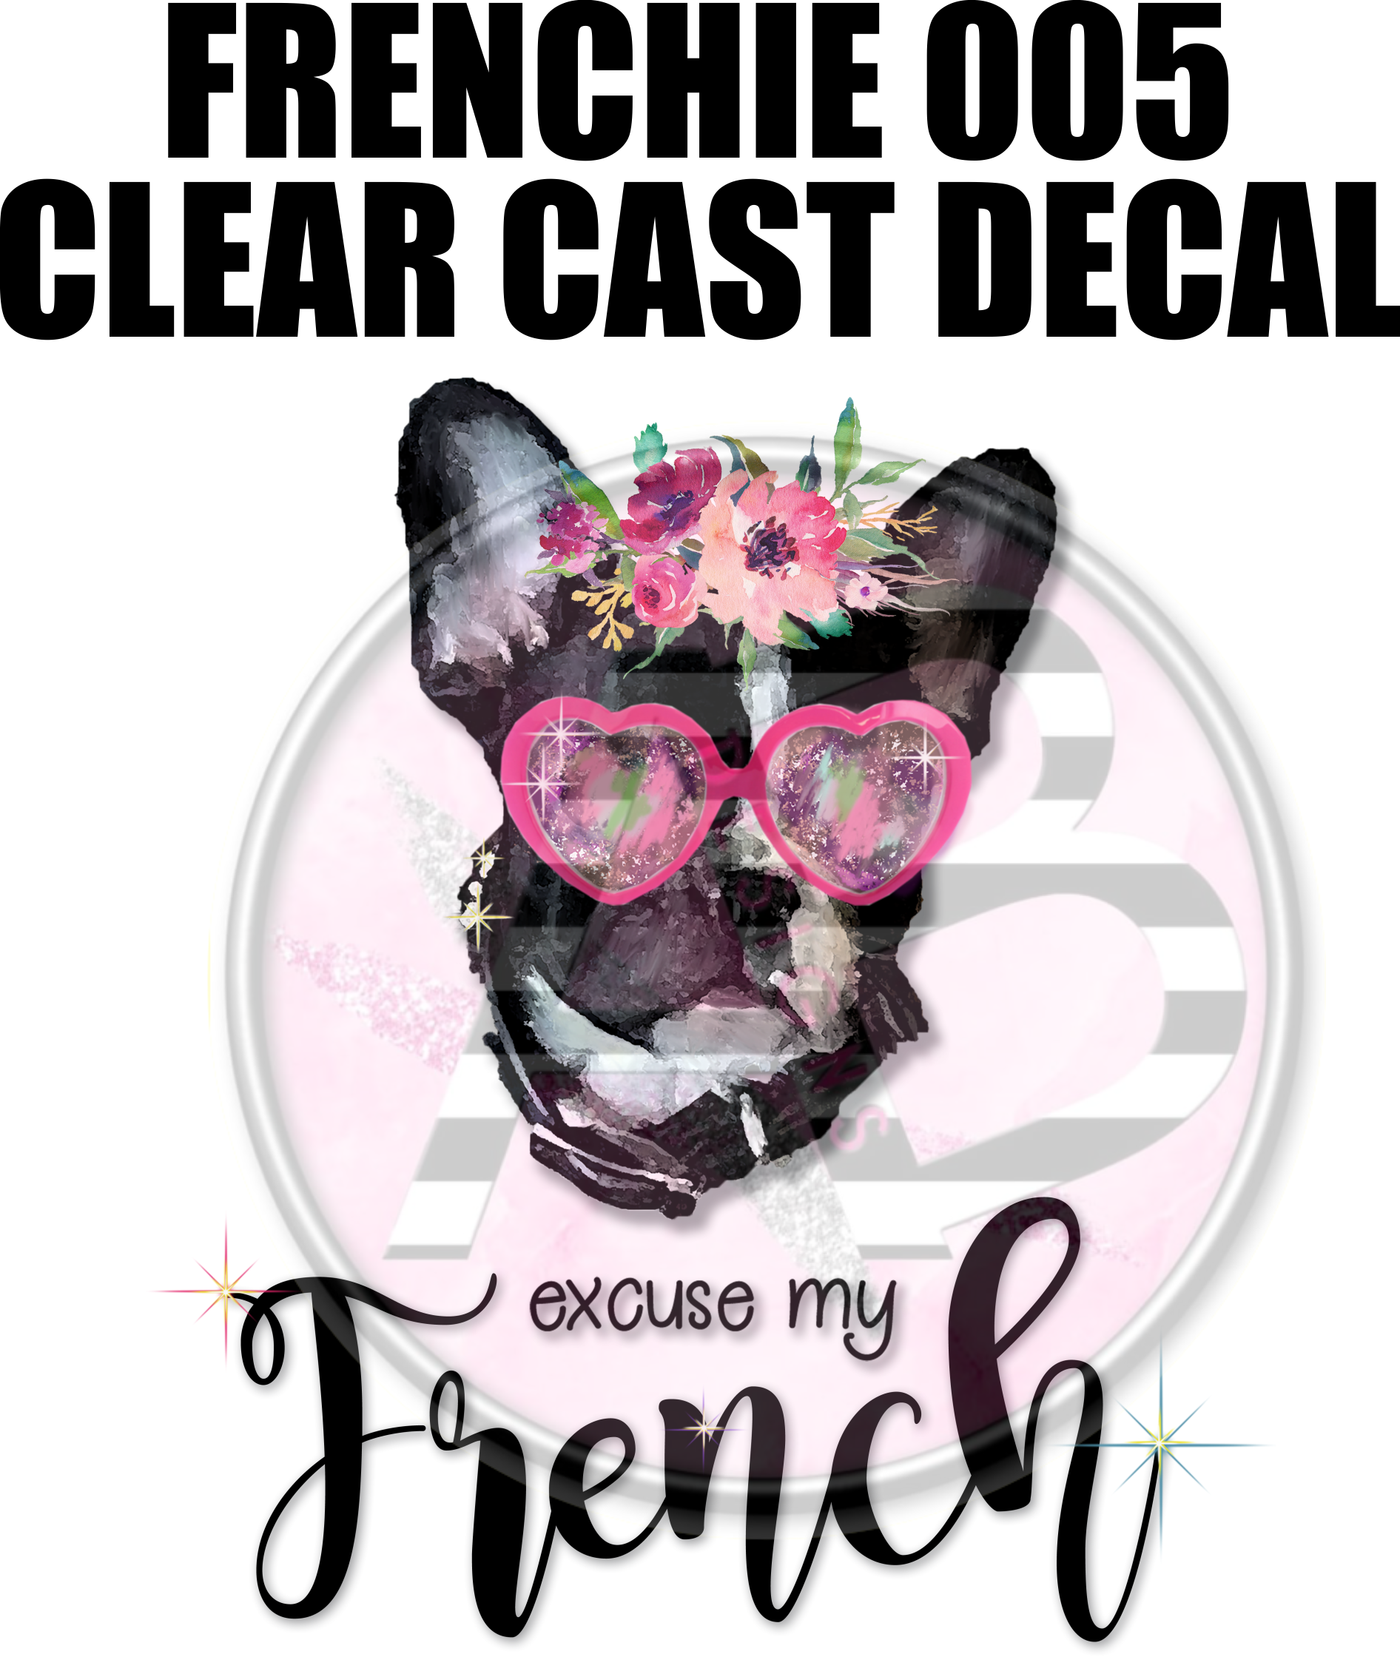 Frenchie 005 - Clear Cast Decal